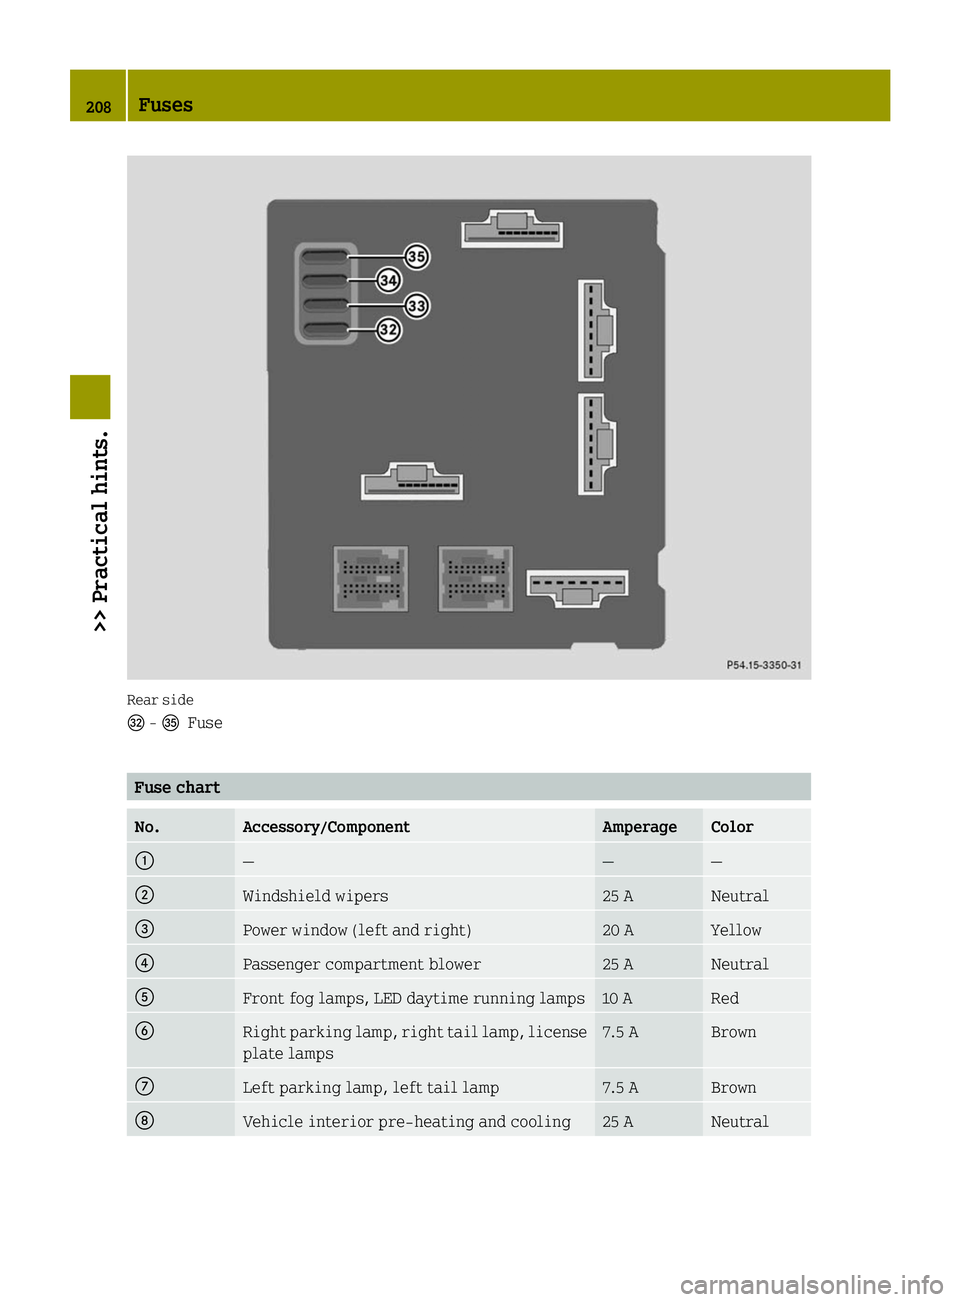 SMART FORTWO COUPE ELECTRIC DRIVE 2014  Owners Manual Rear side
0069
-00B7
Fuse Fuse chart
No. Accessory/Component Amperage Color
0043
— — —
0044
Windshield wipers 25 A Neutral
0087
Power window (left and right) 20 A Yellow
0085
Passenger compartme